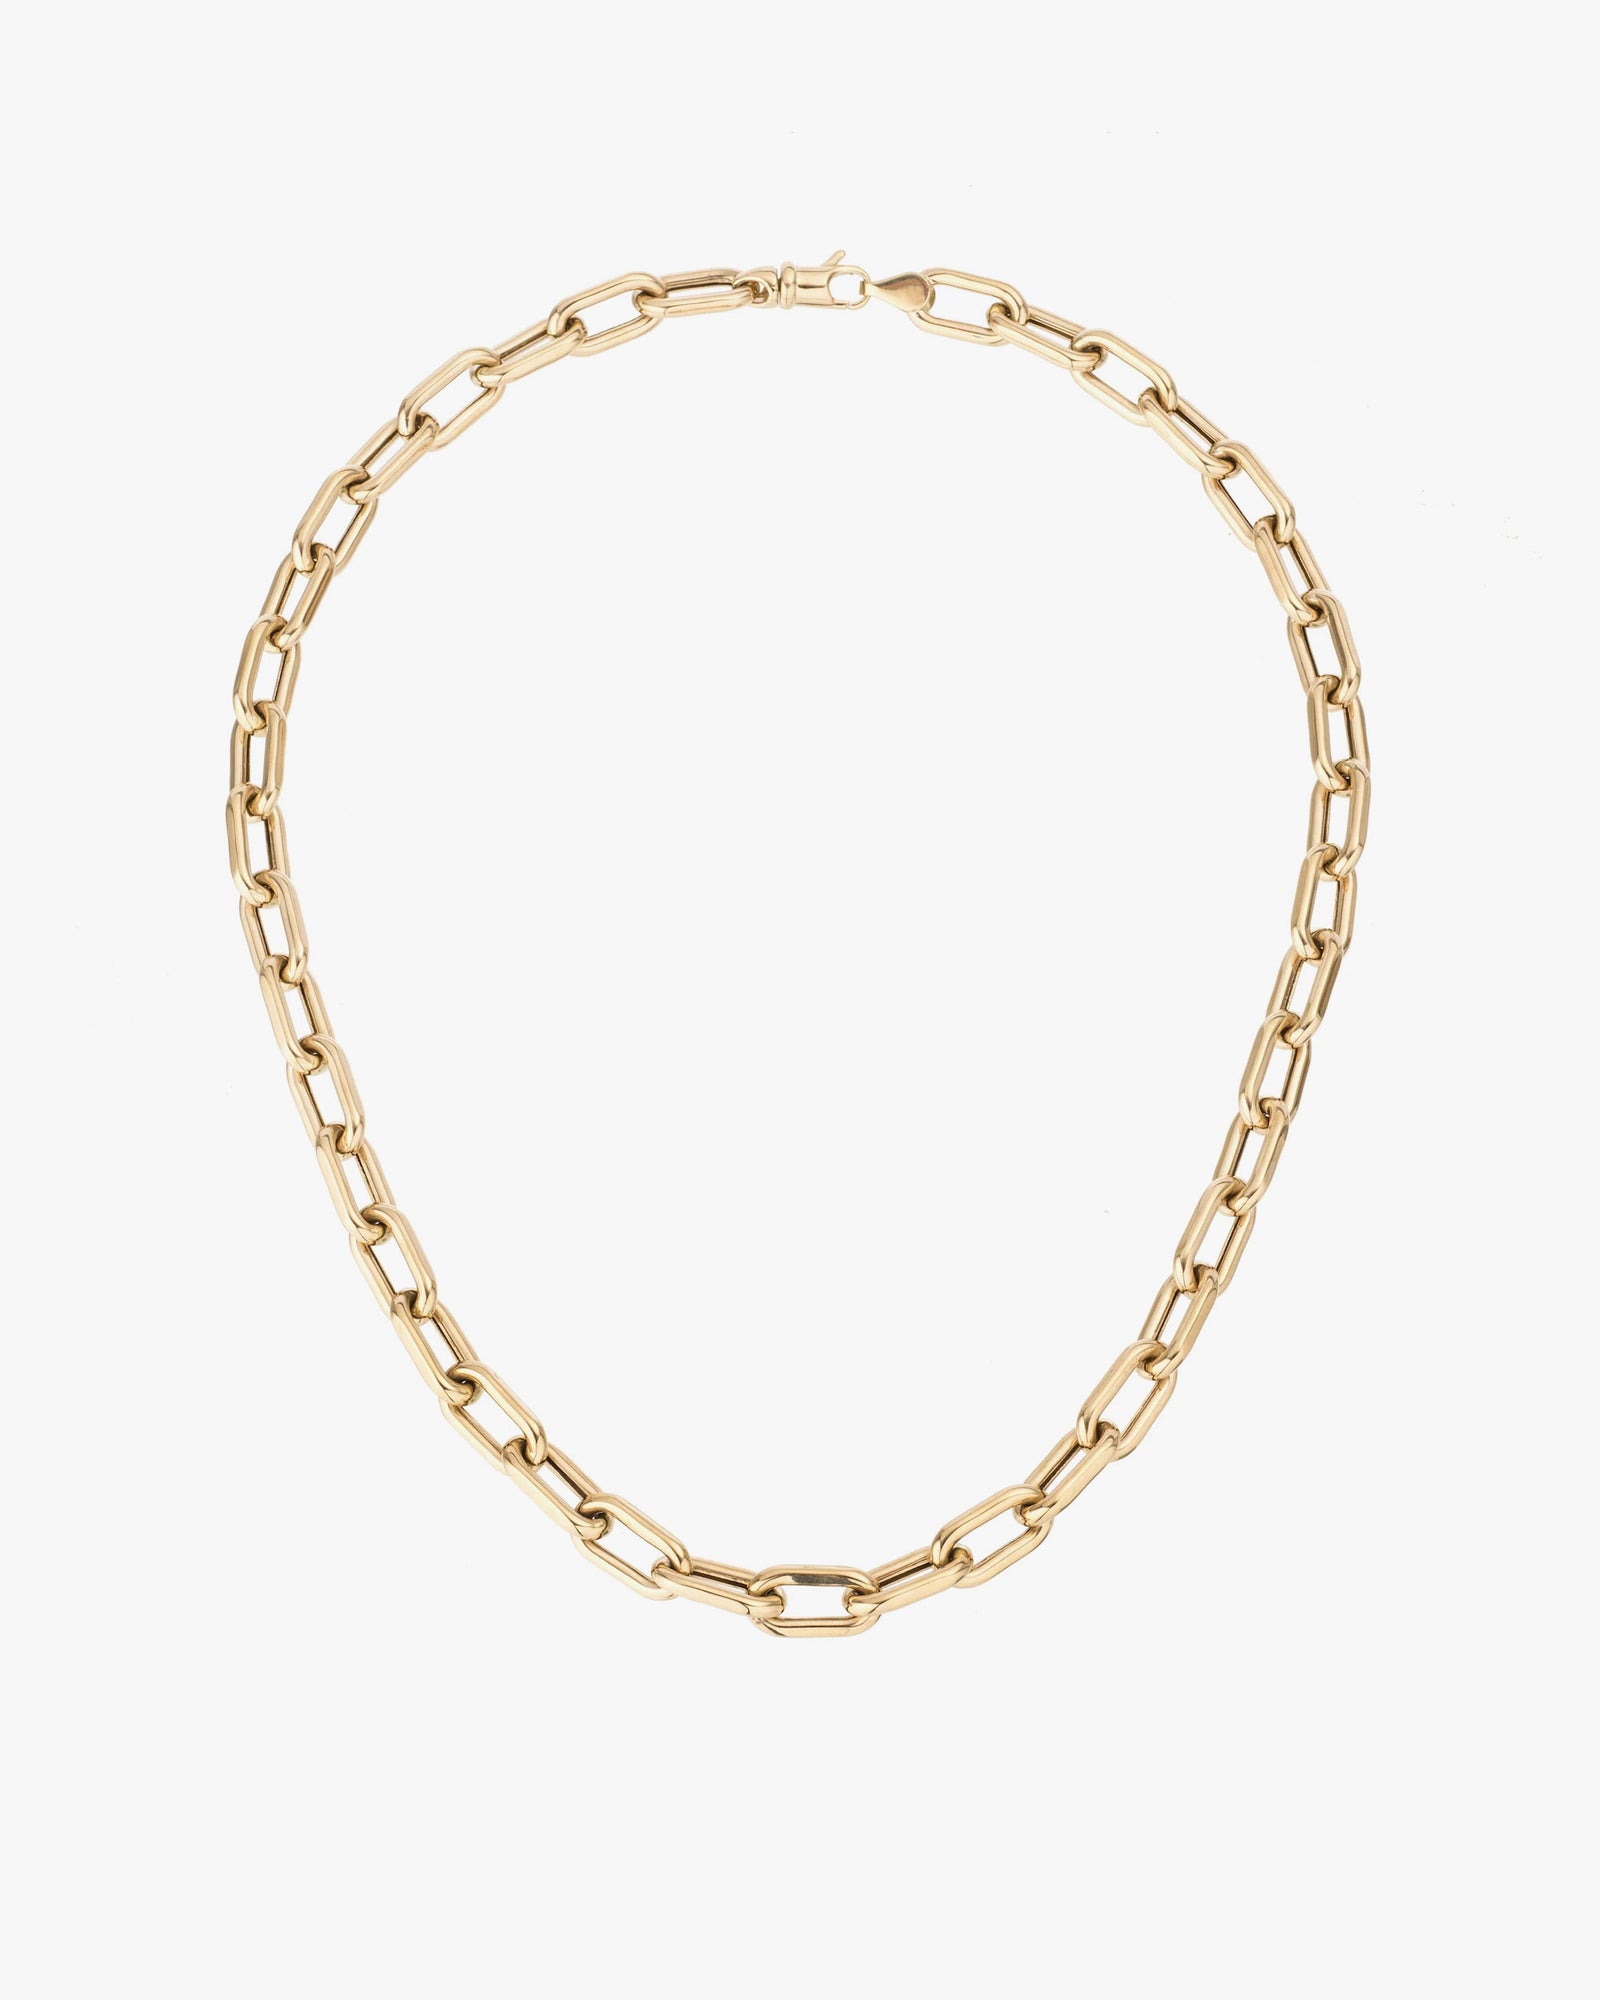 7mm Italian Chain Link Necklace